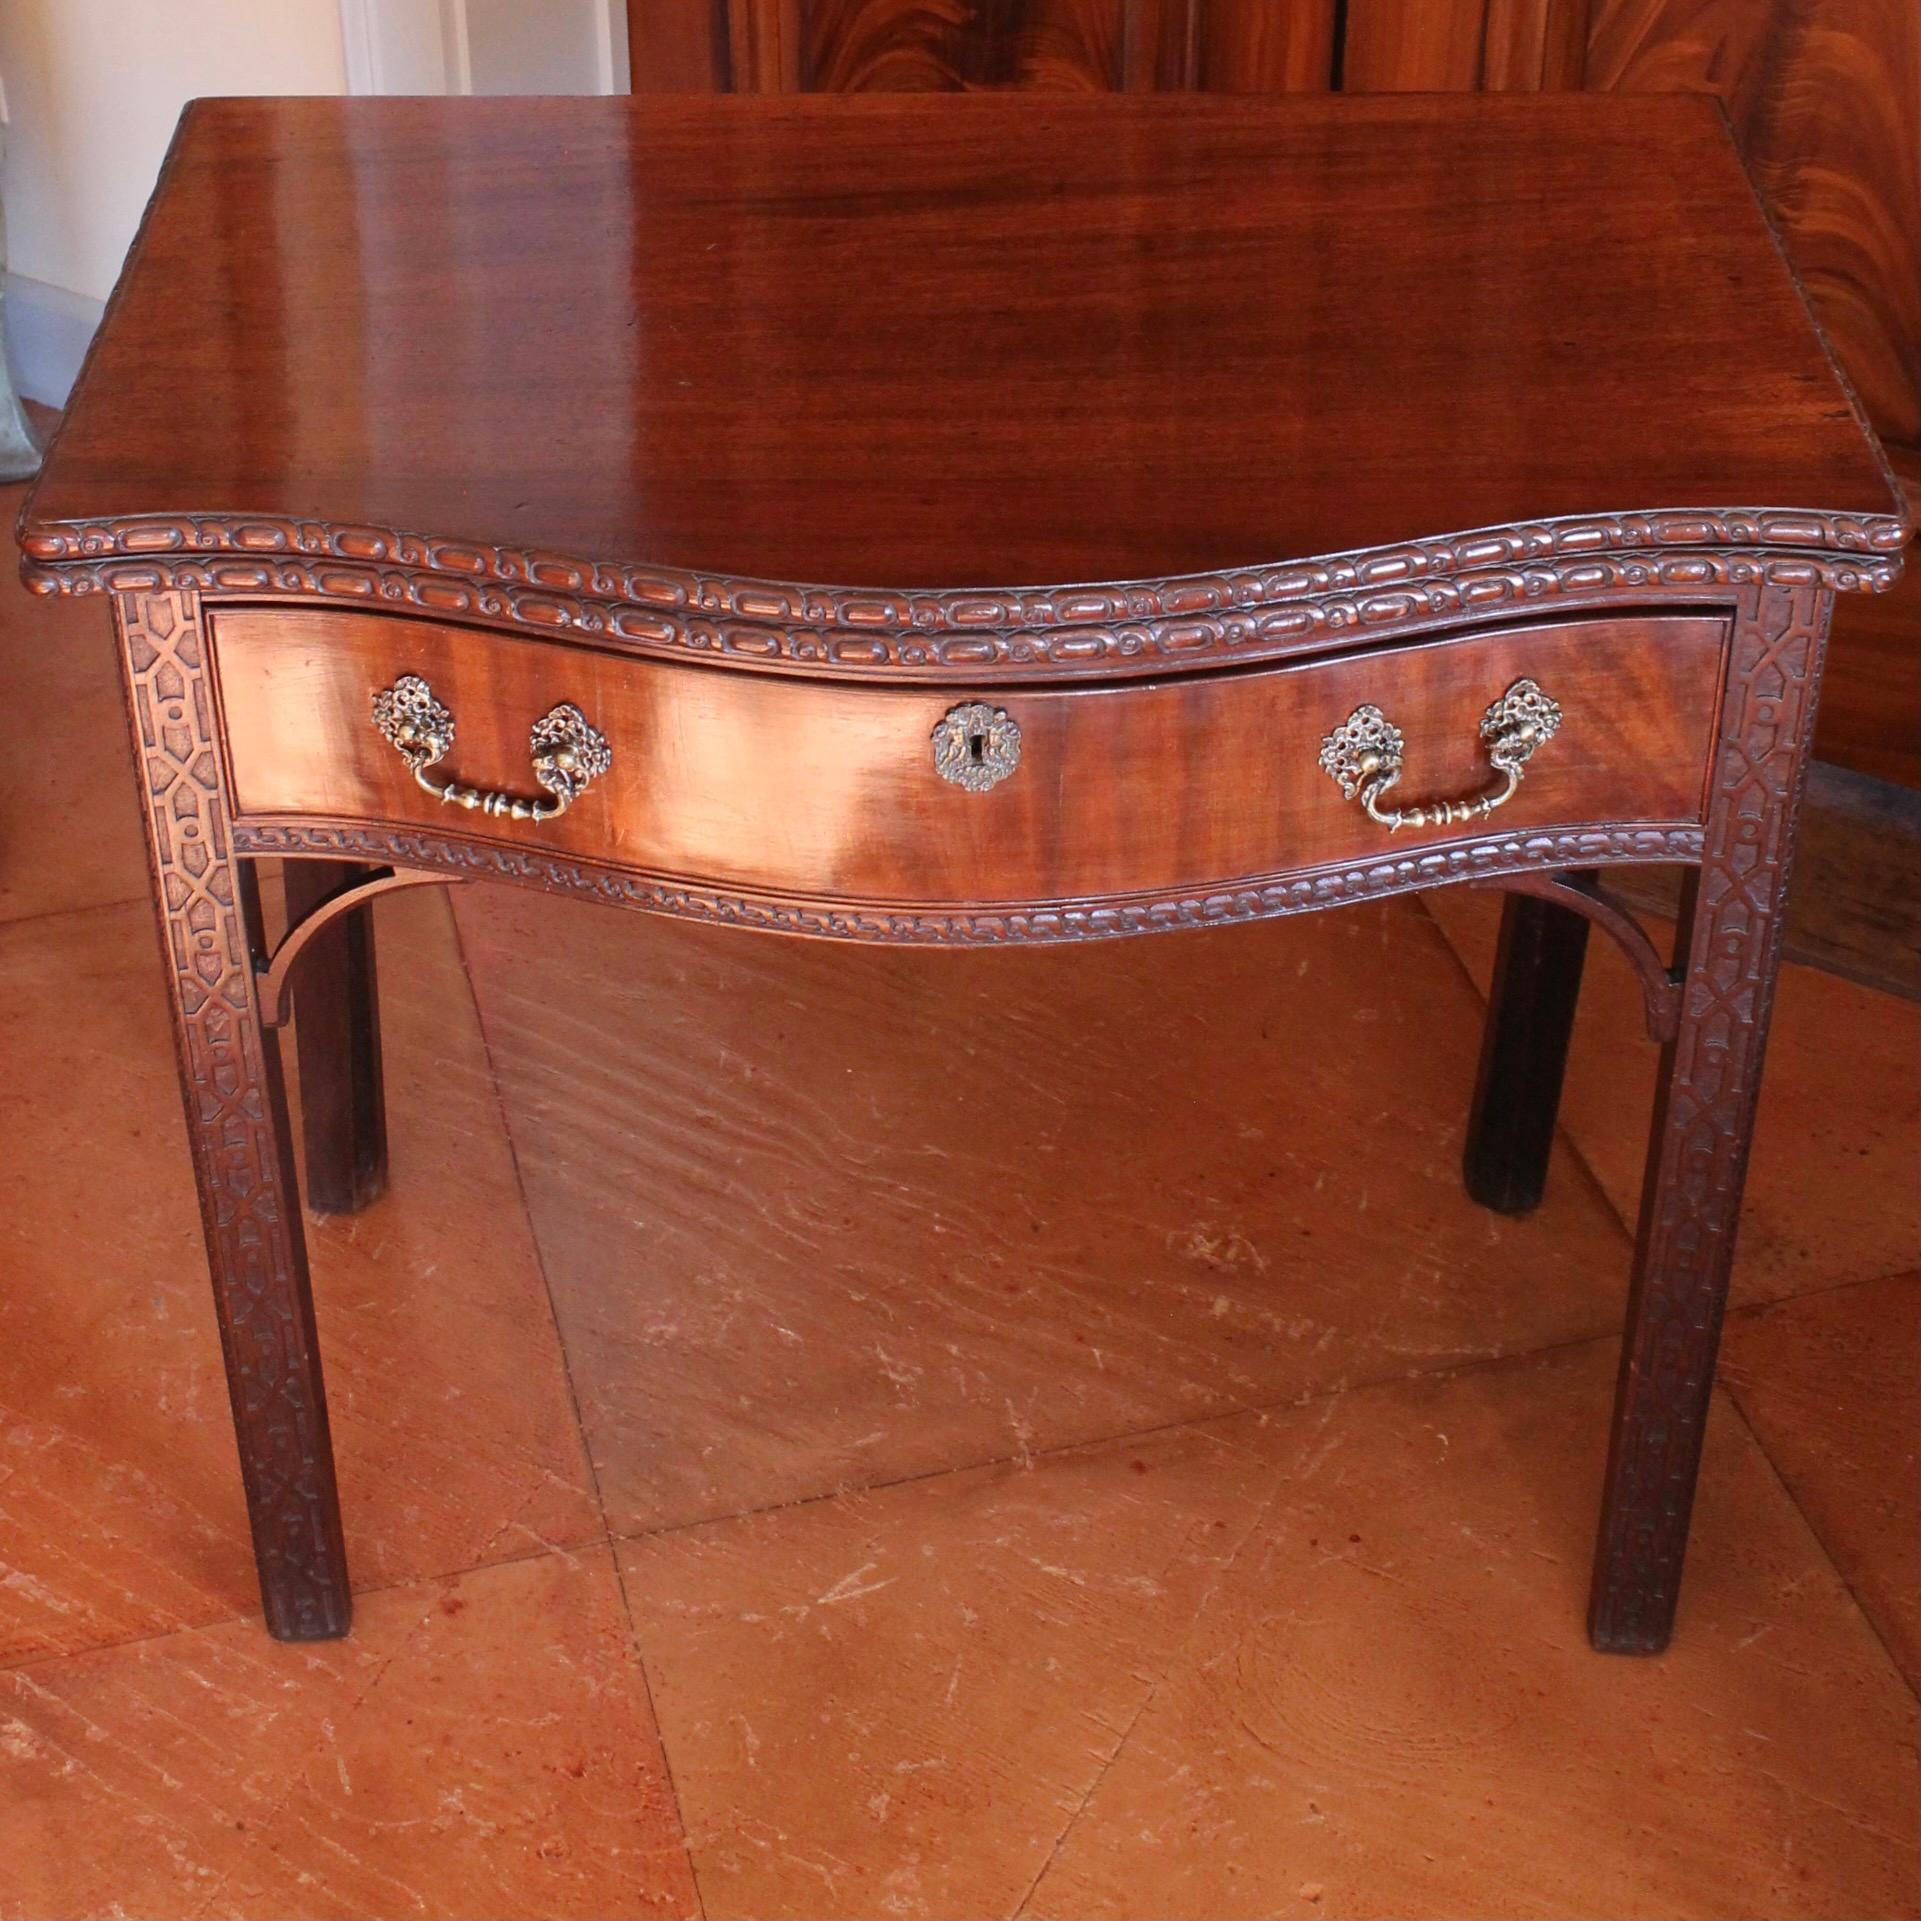 Hand-Carved George III Serpentine Front Table With Chinese Chippendale Fret Legs, 18th c. For Sale